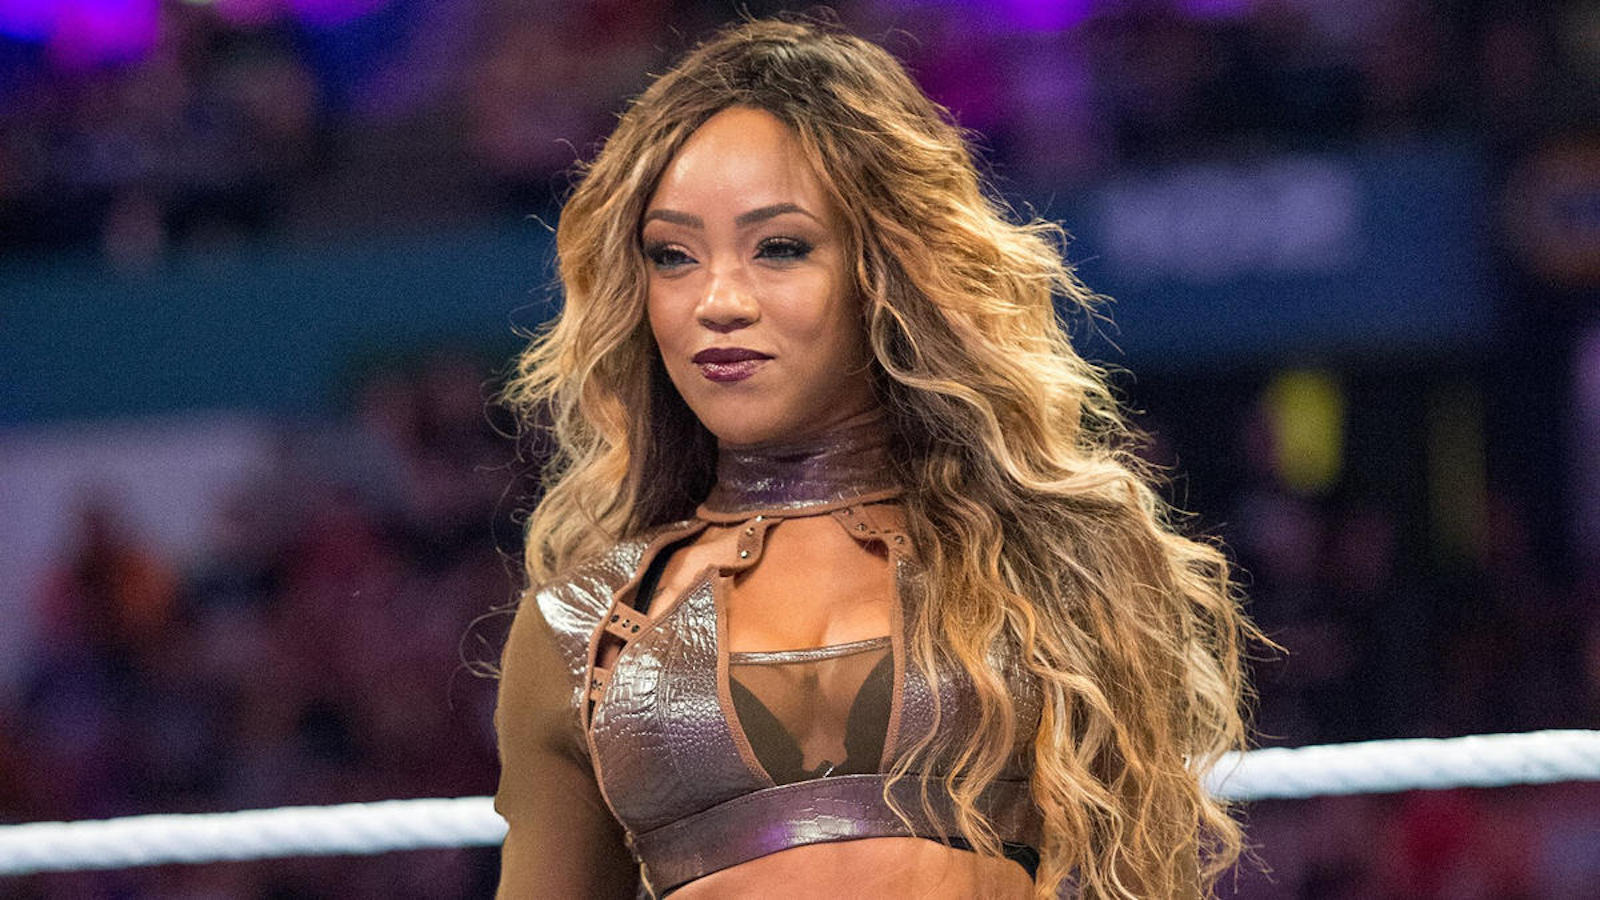 Former Alicia Fox Discusses Her Shift To Become Vix Crow